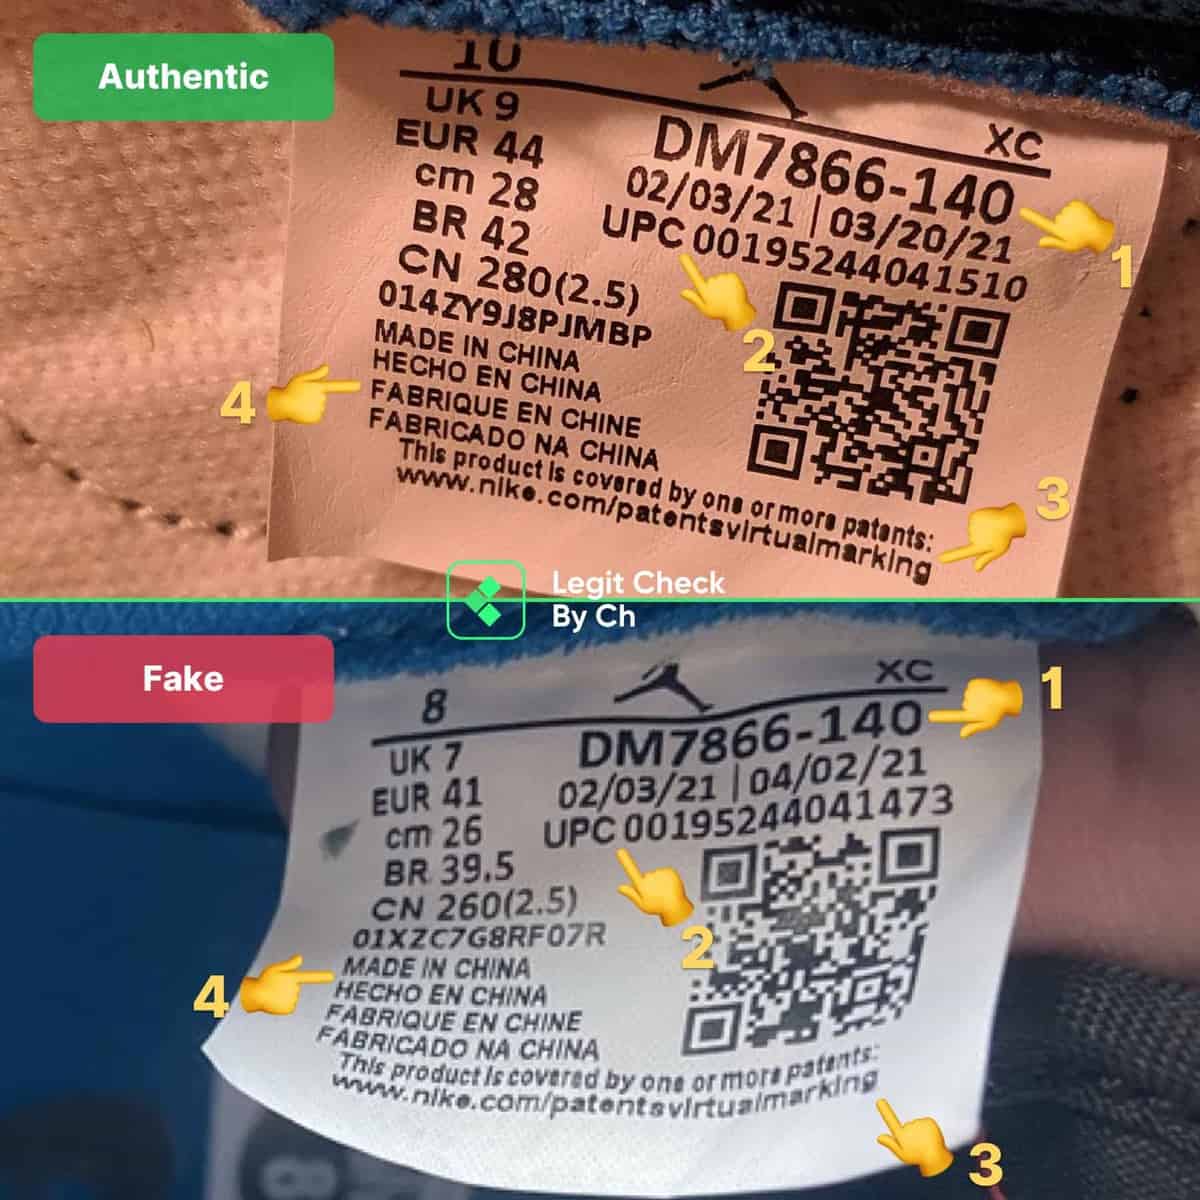 Travis Scott X Fragment Air Jordan 1 Low Fake Vs Real Guide How To Spot Fakes In 21 Legit Check By Ch